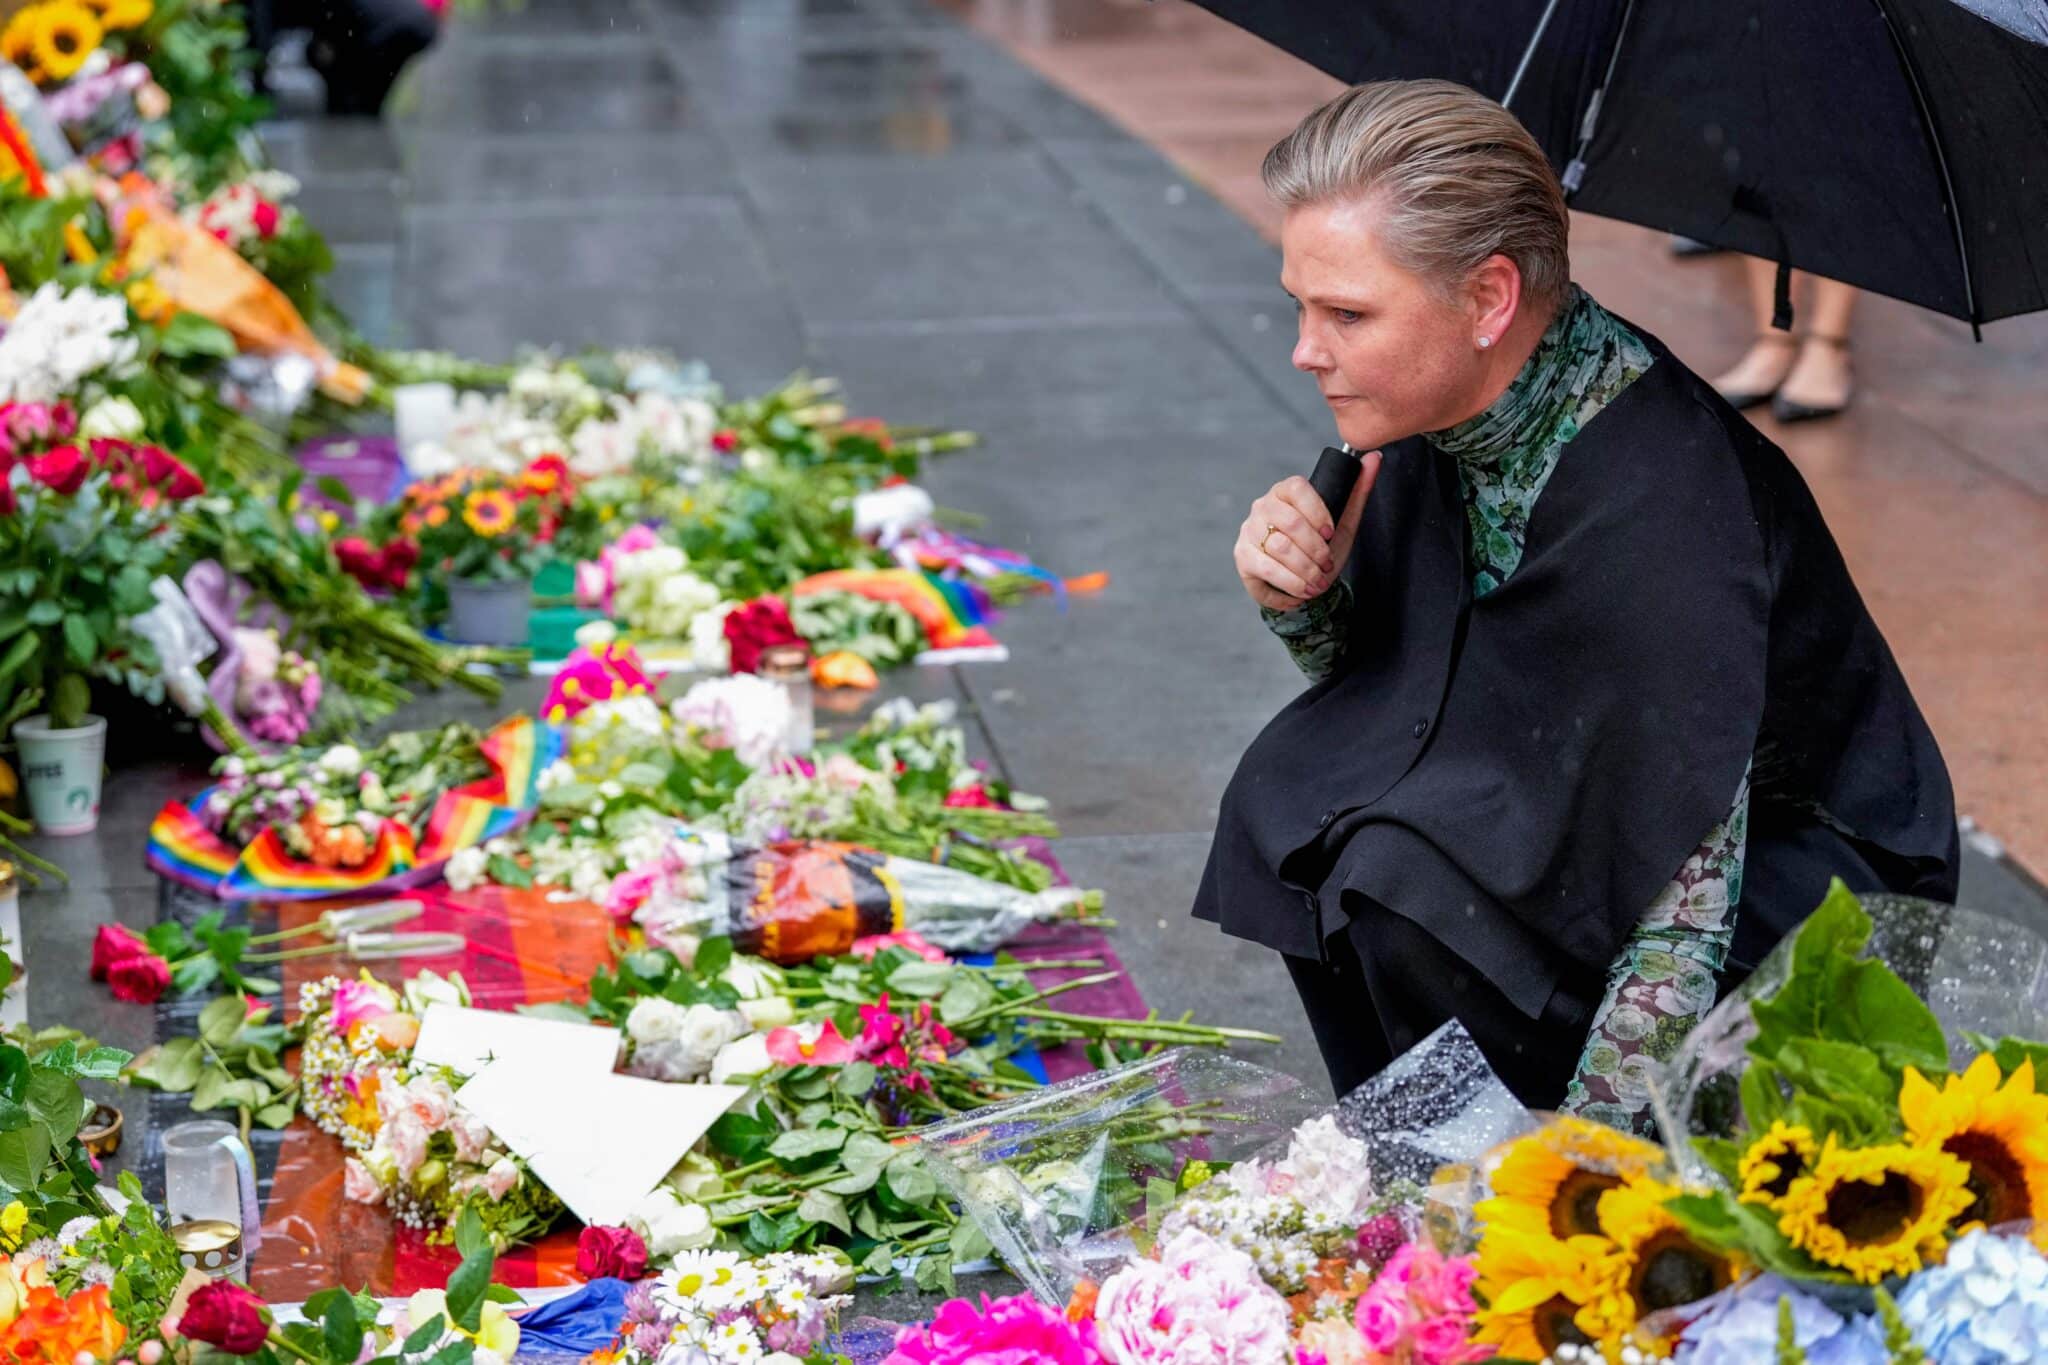 Anne Beathe Tvinnereim, Norway's Minister of International Development, lays flowers at the memorial site where two people where shot in a attack at several LGBTQ+ bars in Oslo, Norway in June 2022